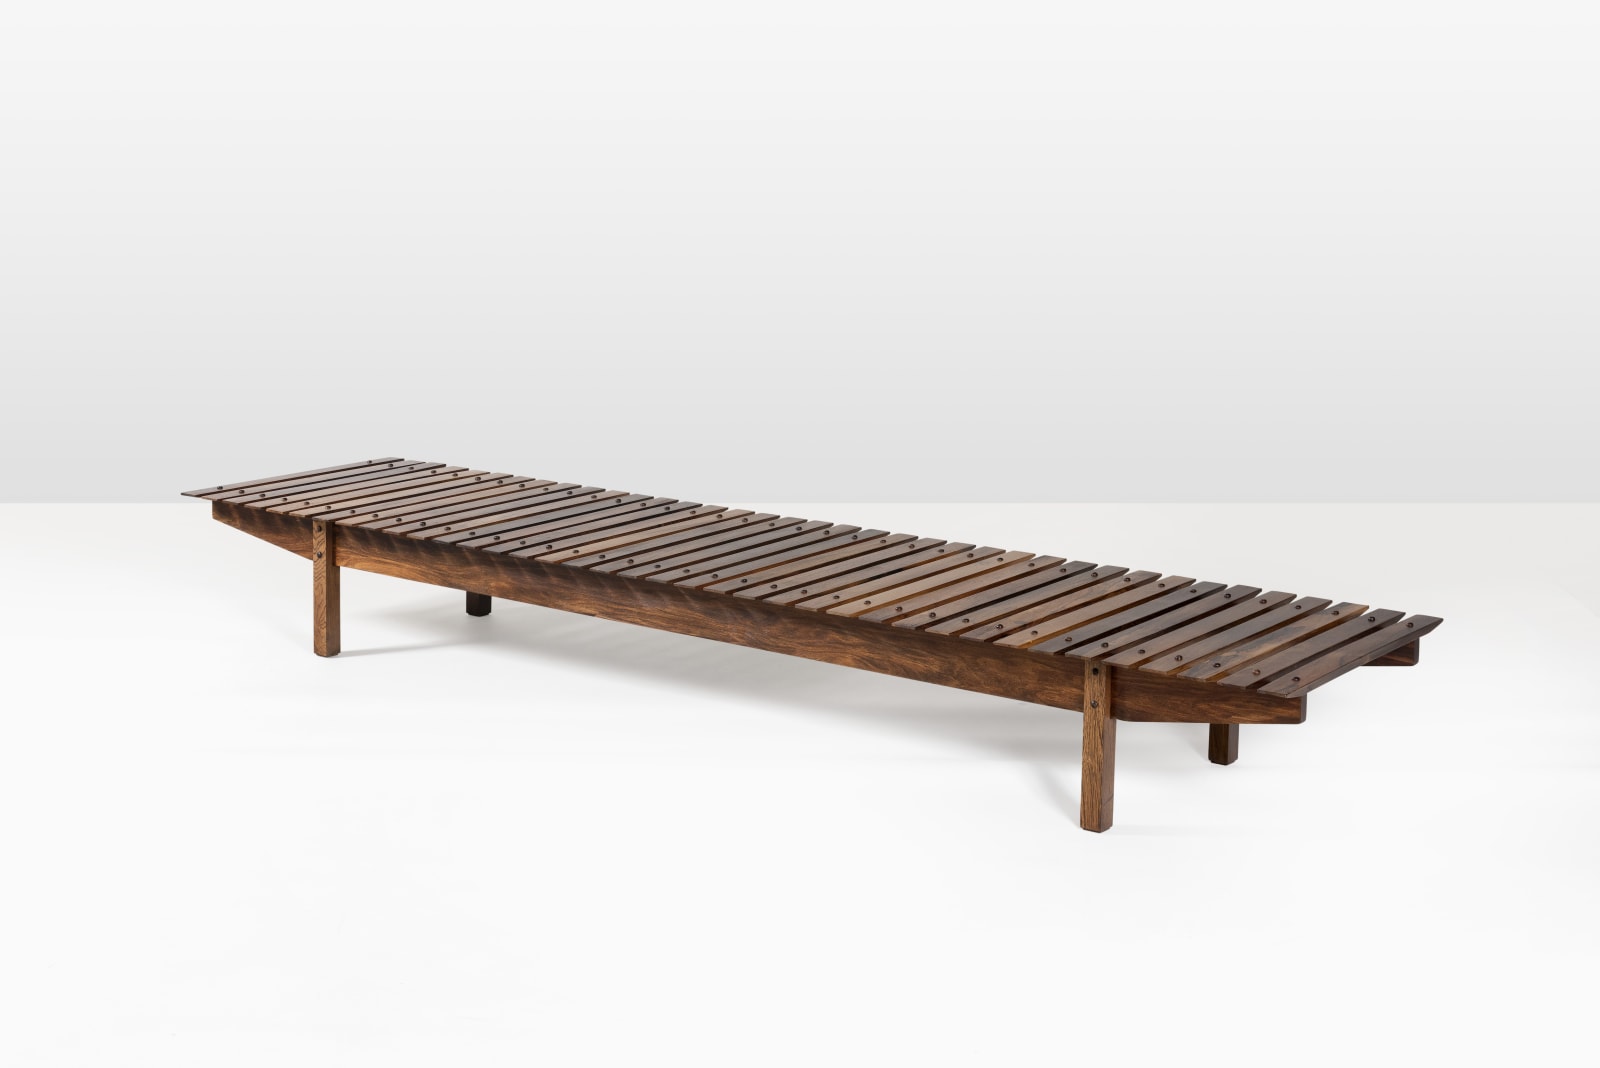 Sergio Rodrigues “Mucki Bench” from 1958 at the Gokelaere & Robinson stand at BRAFA 2023 in Effect Magazine